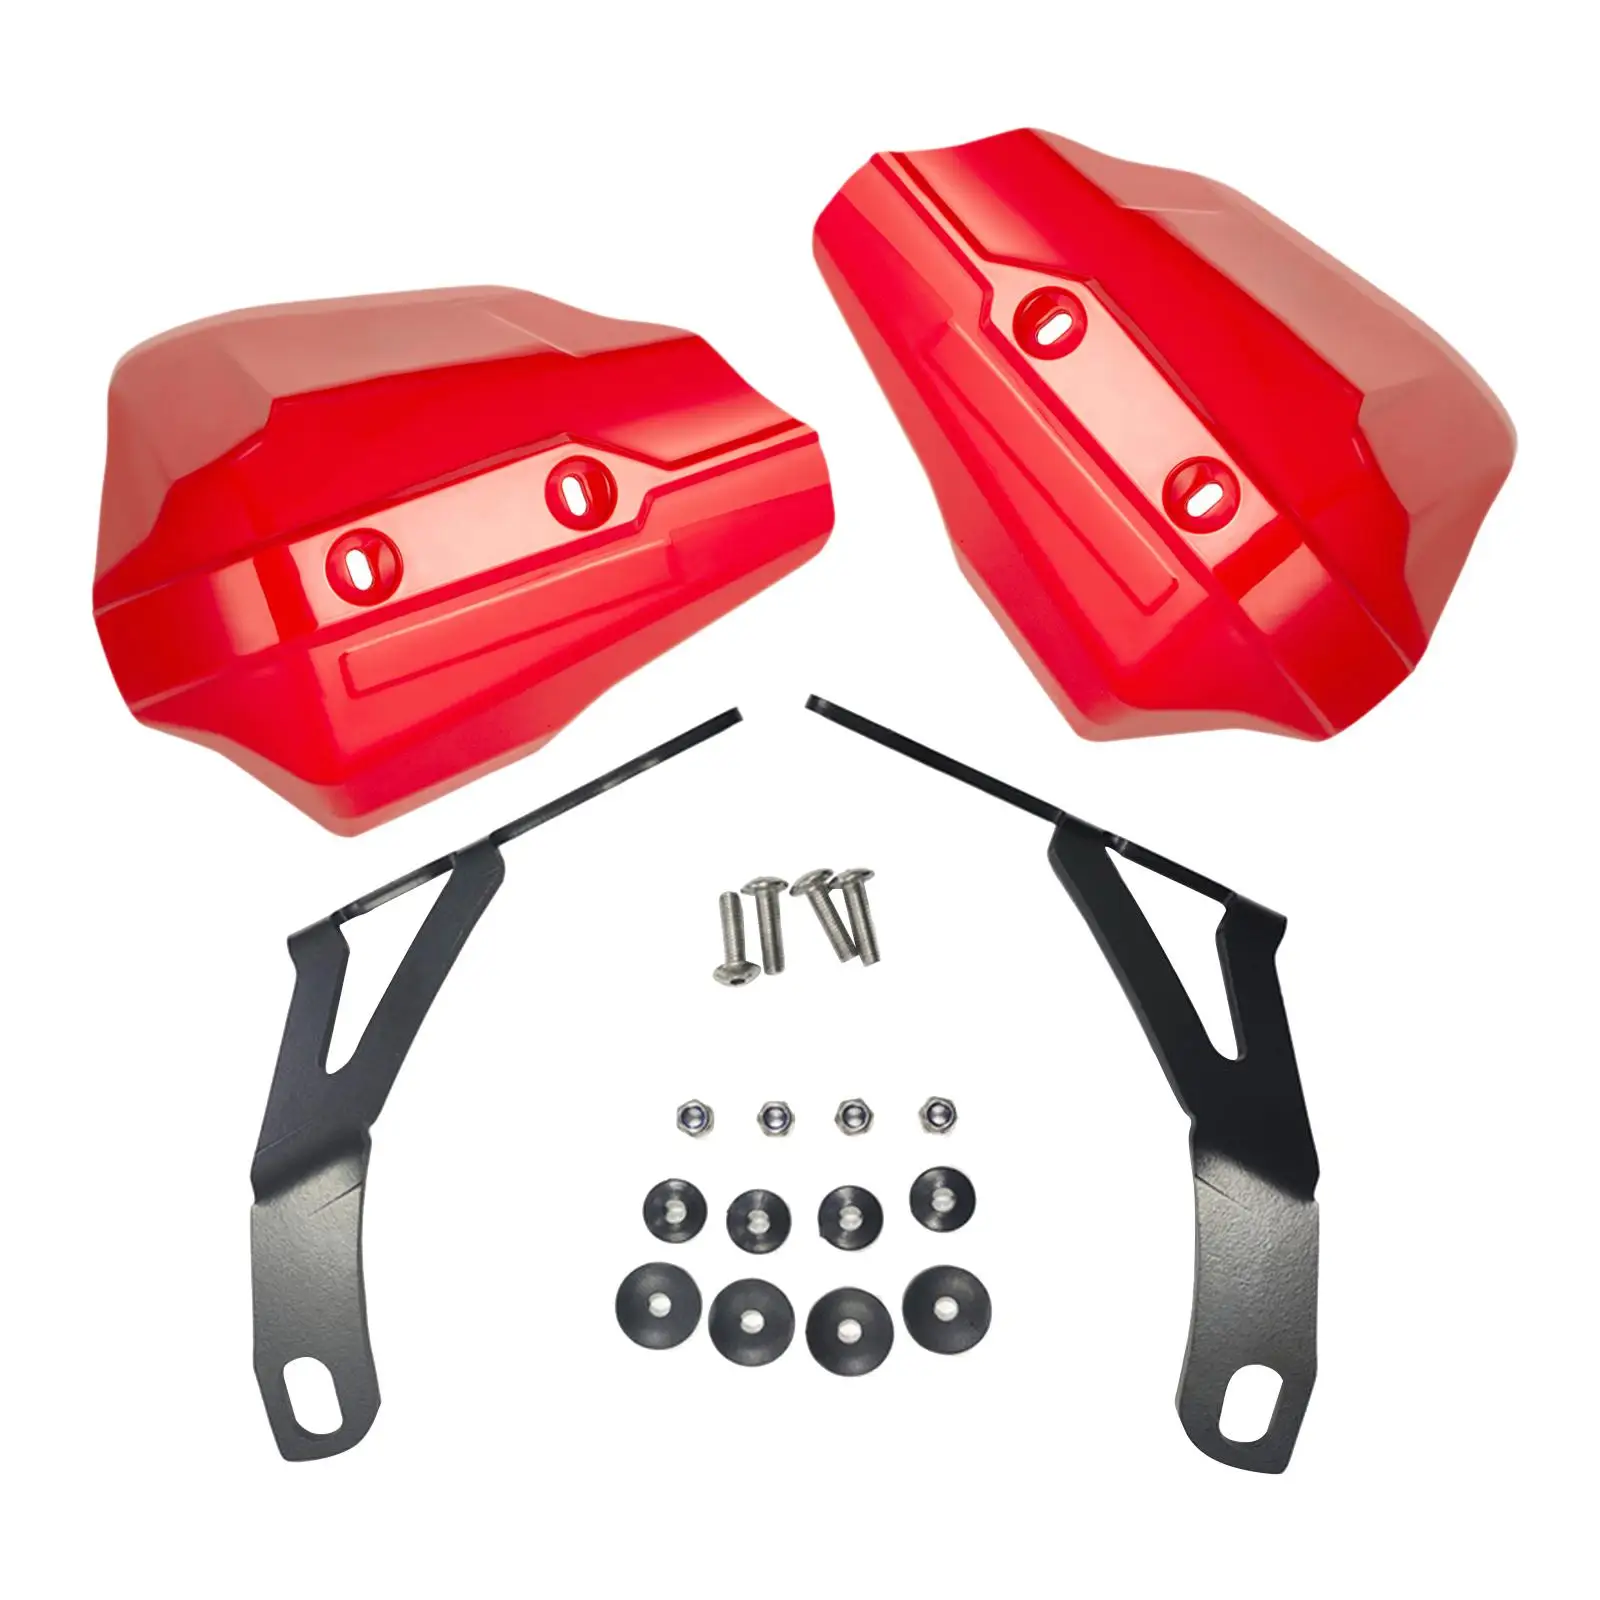 2 Pieces Motorcycle Handguards Wind Protector Touring Hardware Replaces